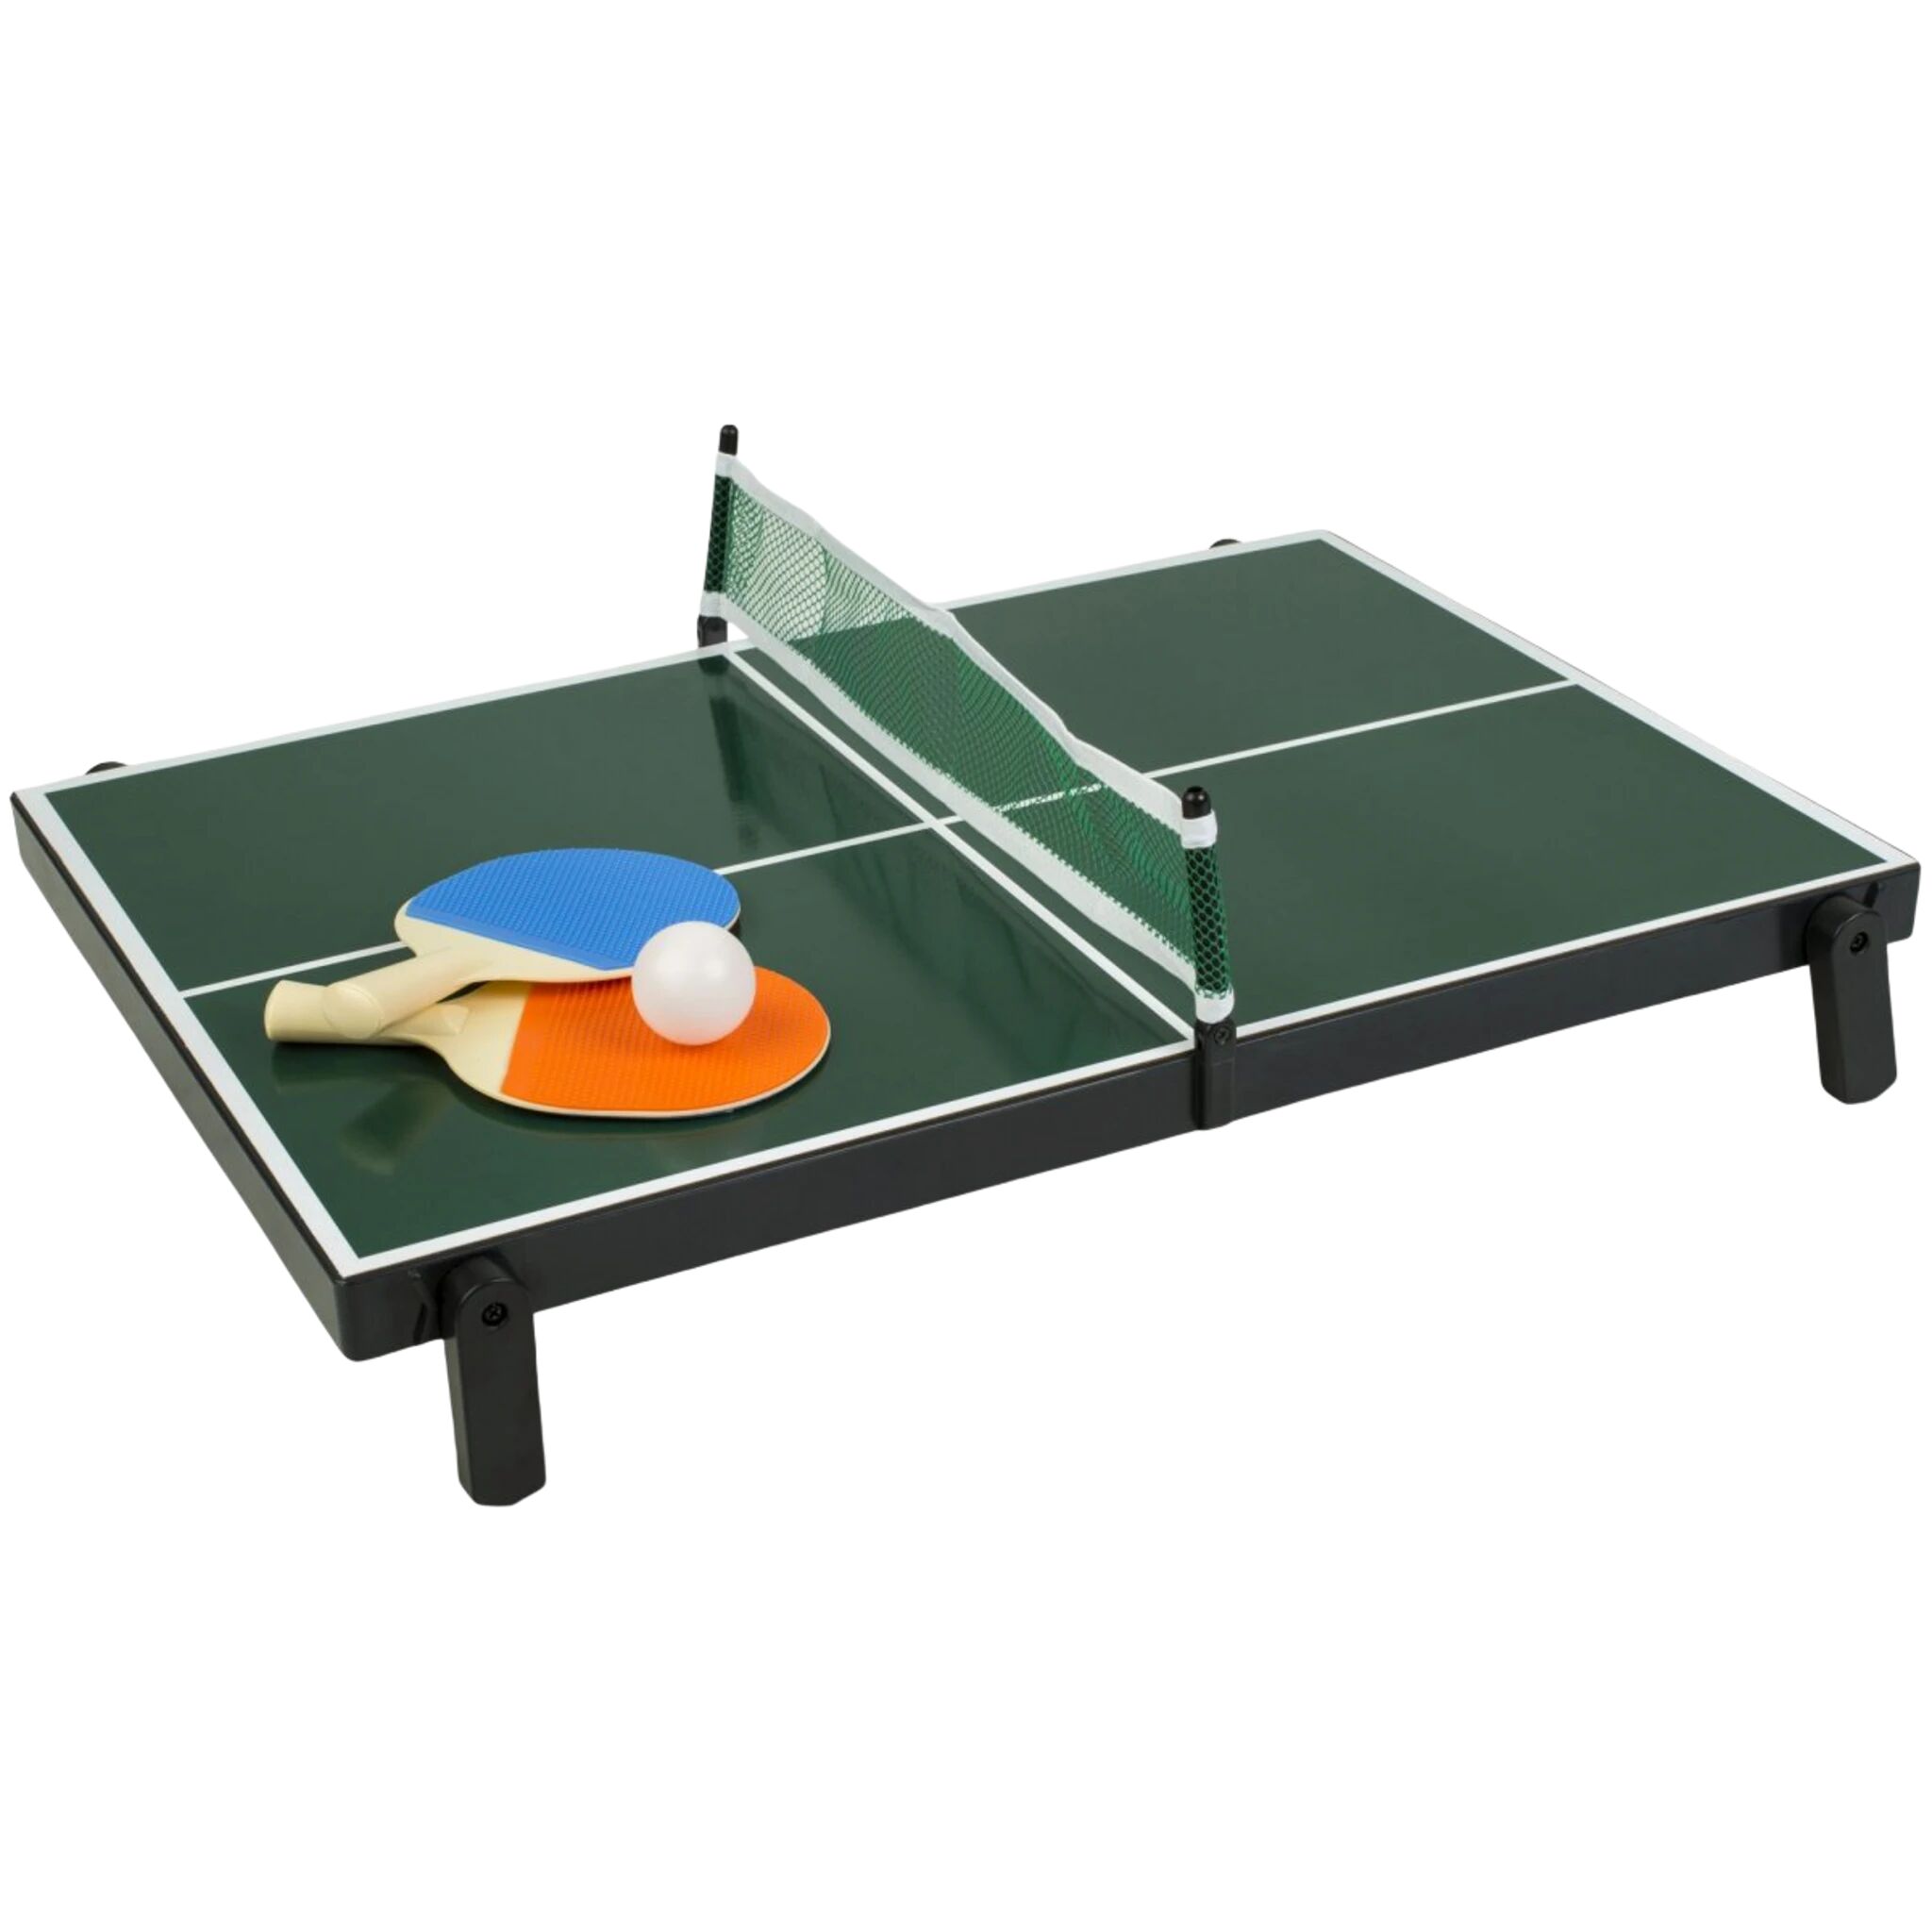 FunBox Tabletop 4 in 1 Game oneSize none